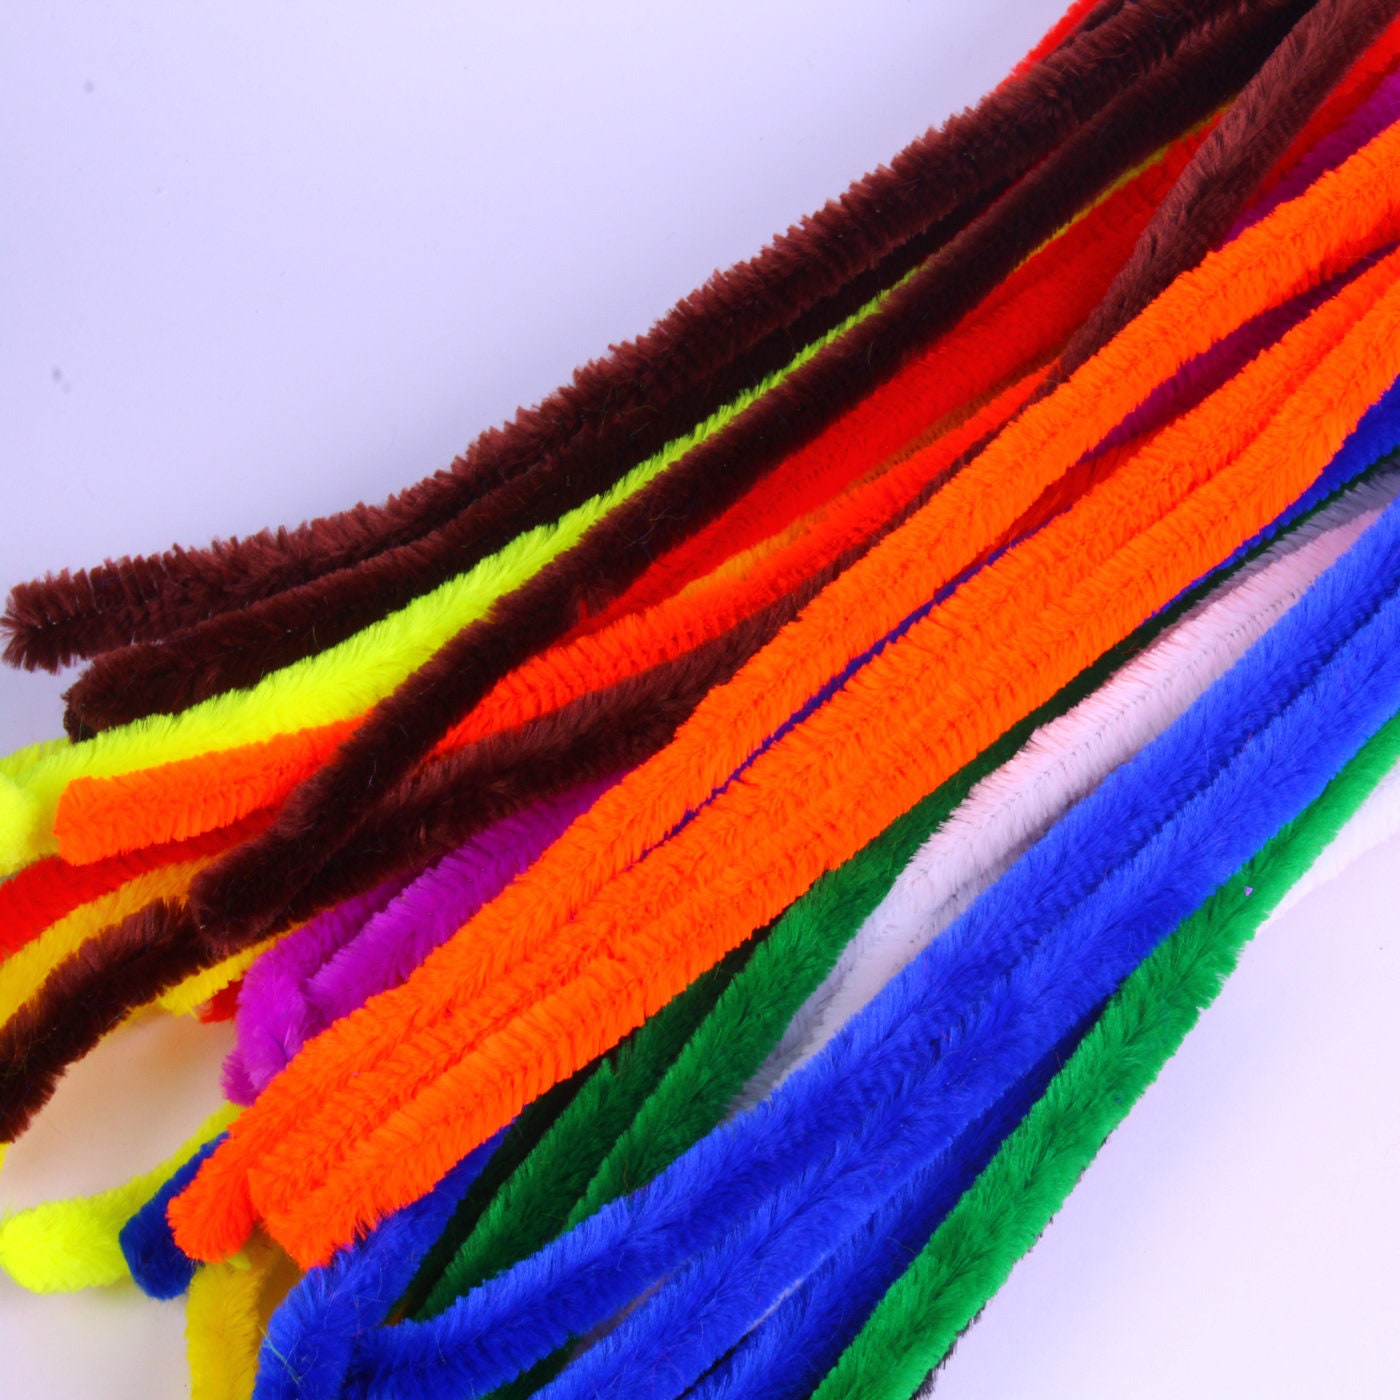 Pack of 100 Black Eid Arts & Craft Pipe Cleaners 